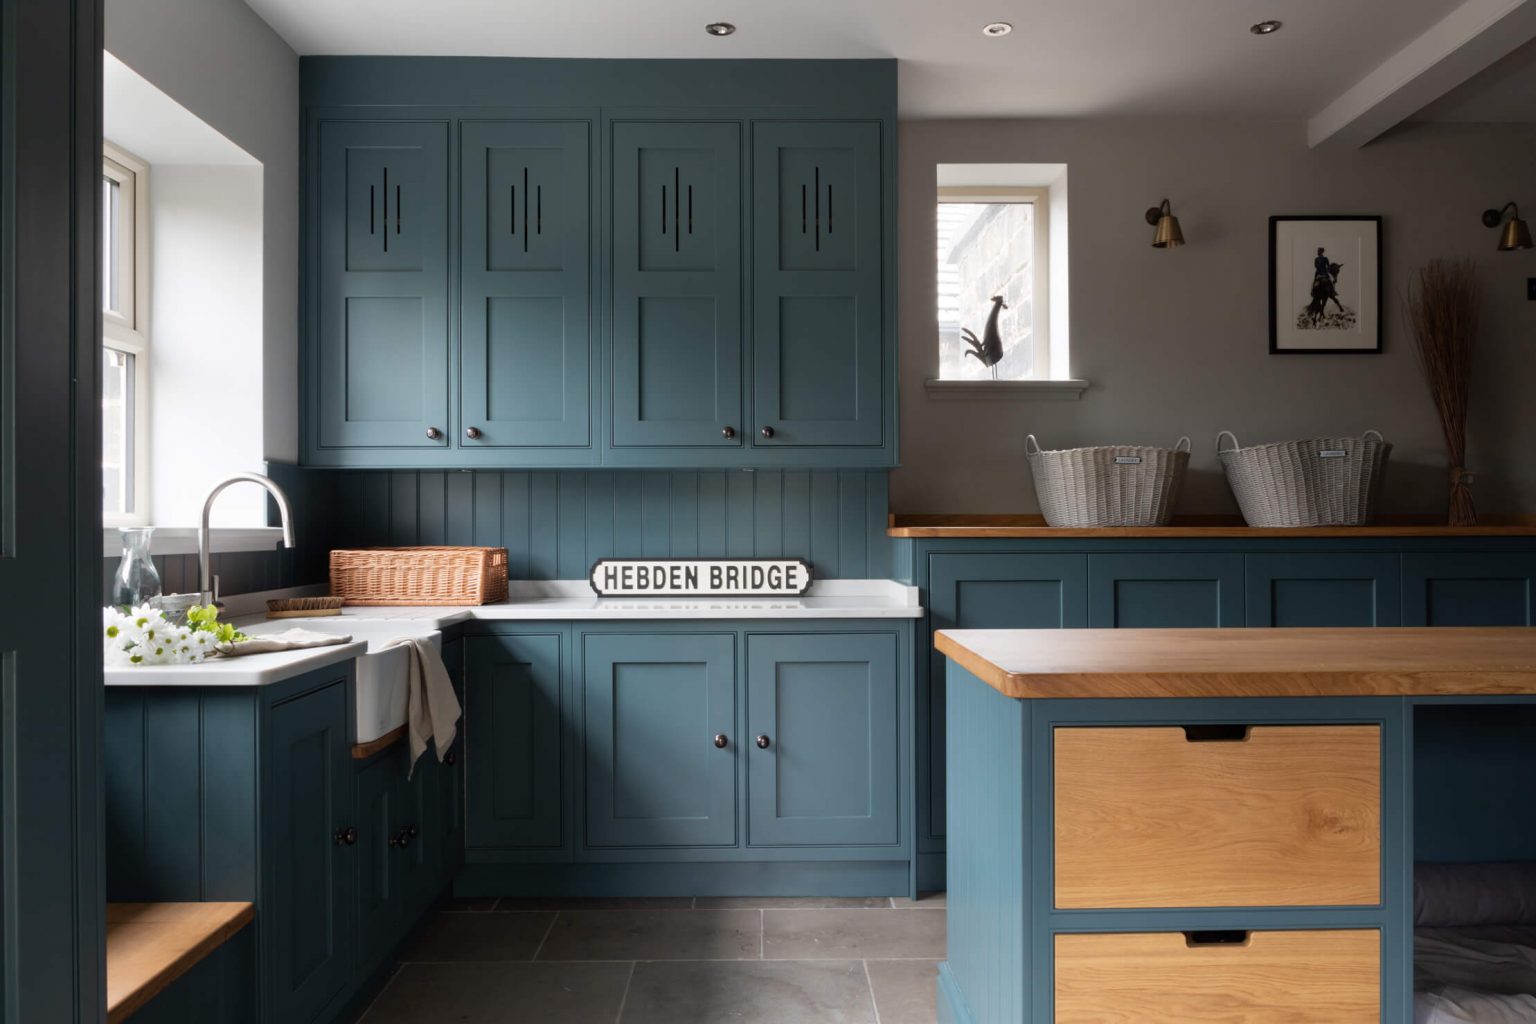 Bespoke cabinetry in a boot room with a sink, extra freezer and fridge, dog bed and more hidden utilities in sstiffkey blue farrow and ball.